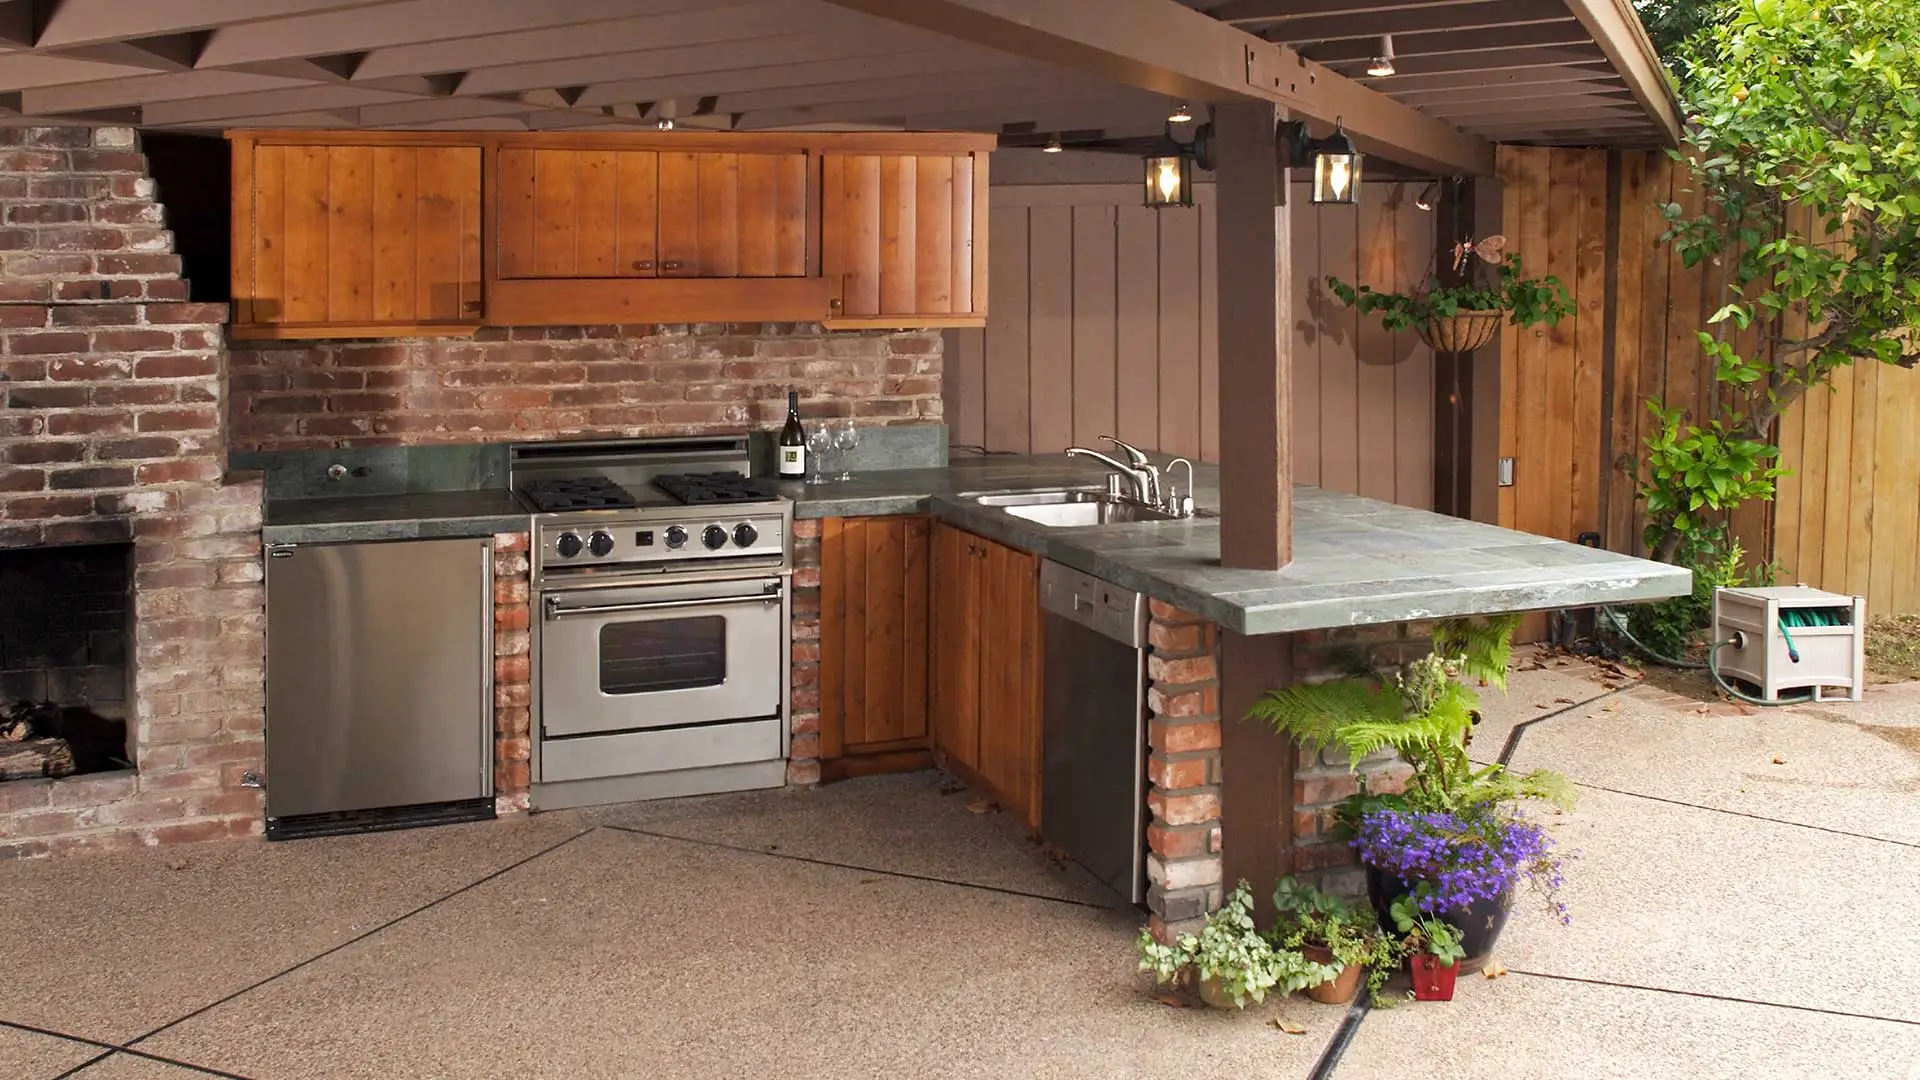 Outdoor kitchen created for a home in Windsor, CO.